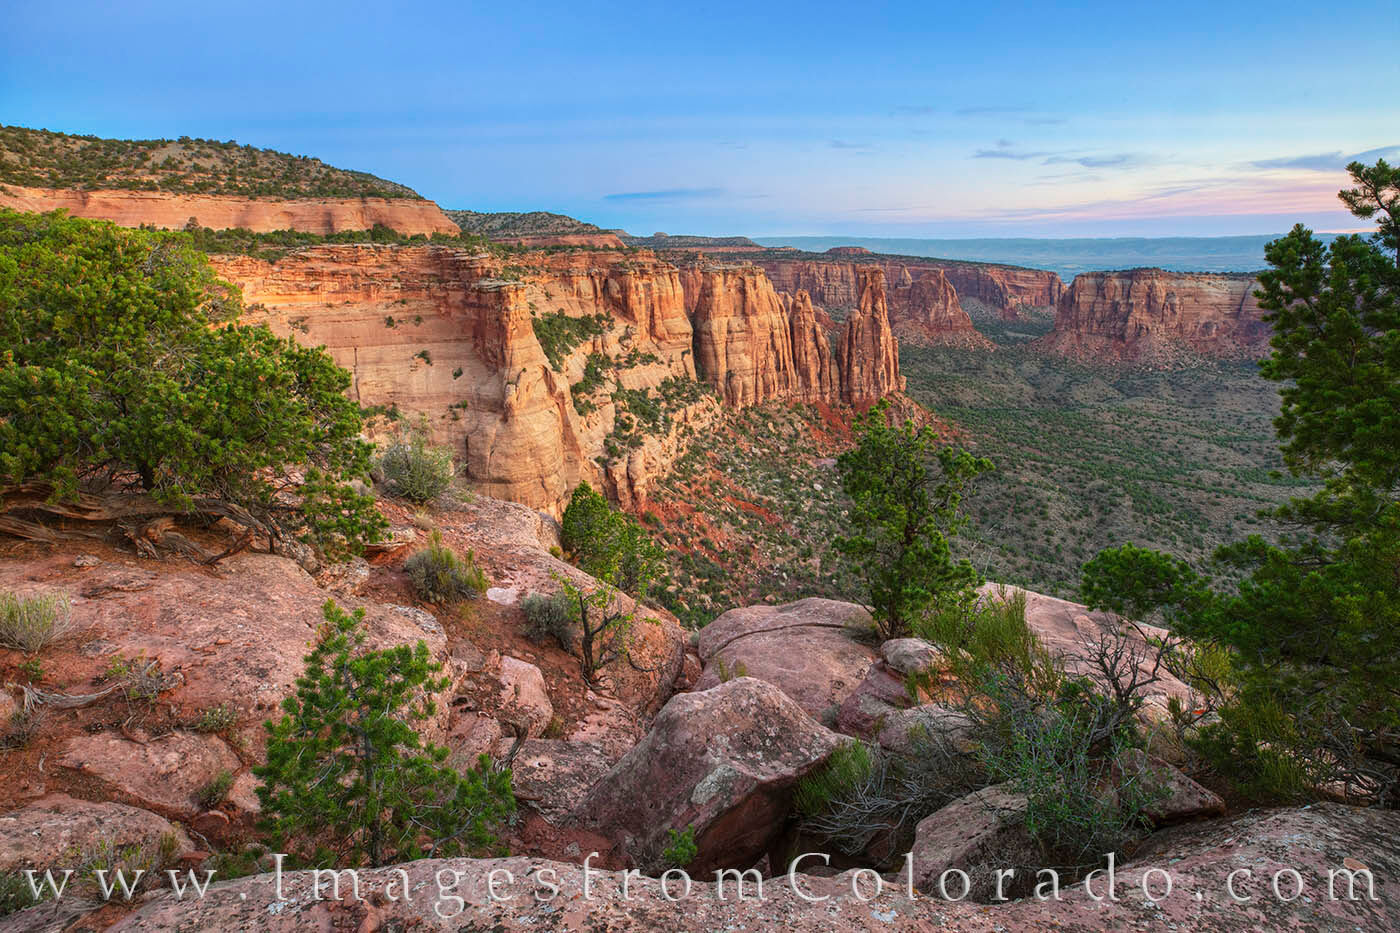 Sunrise over Monument Canyon in Colorado National Monument is a beautiful time on the western slope of the Rocky Mountains. This...